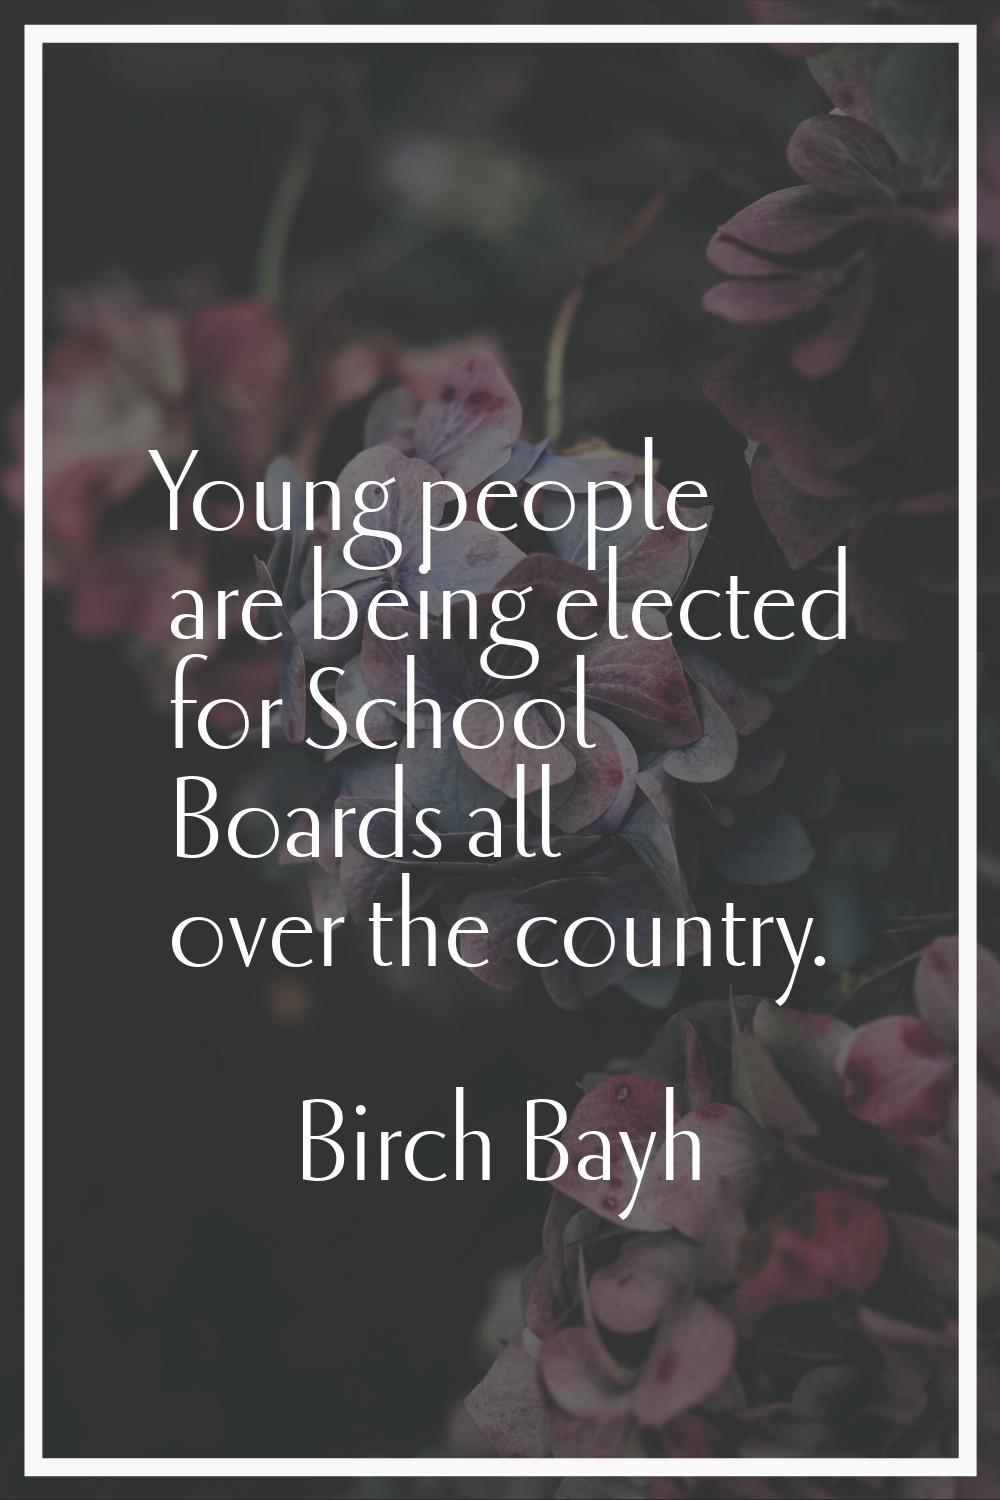 Young people are being elected for School Boards all over the country.